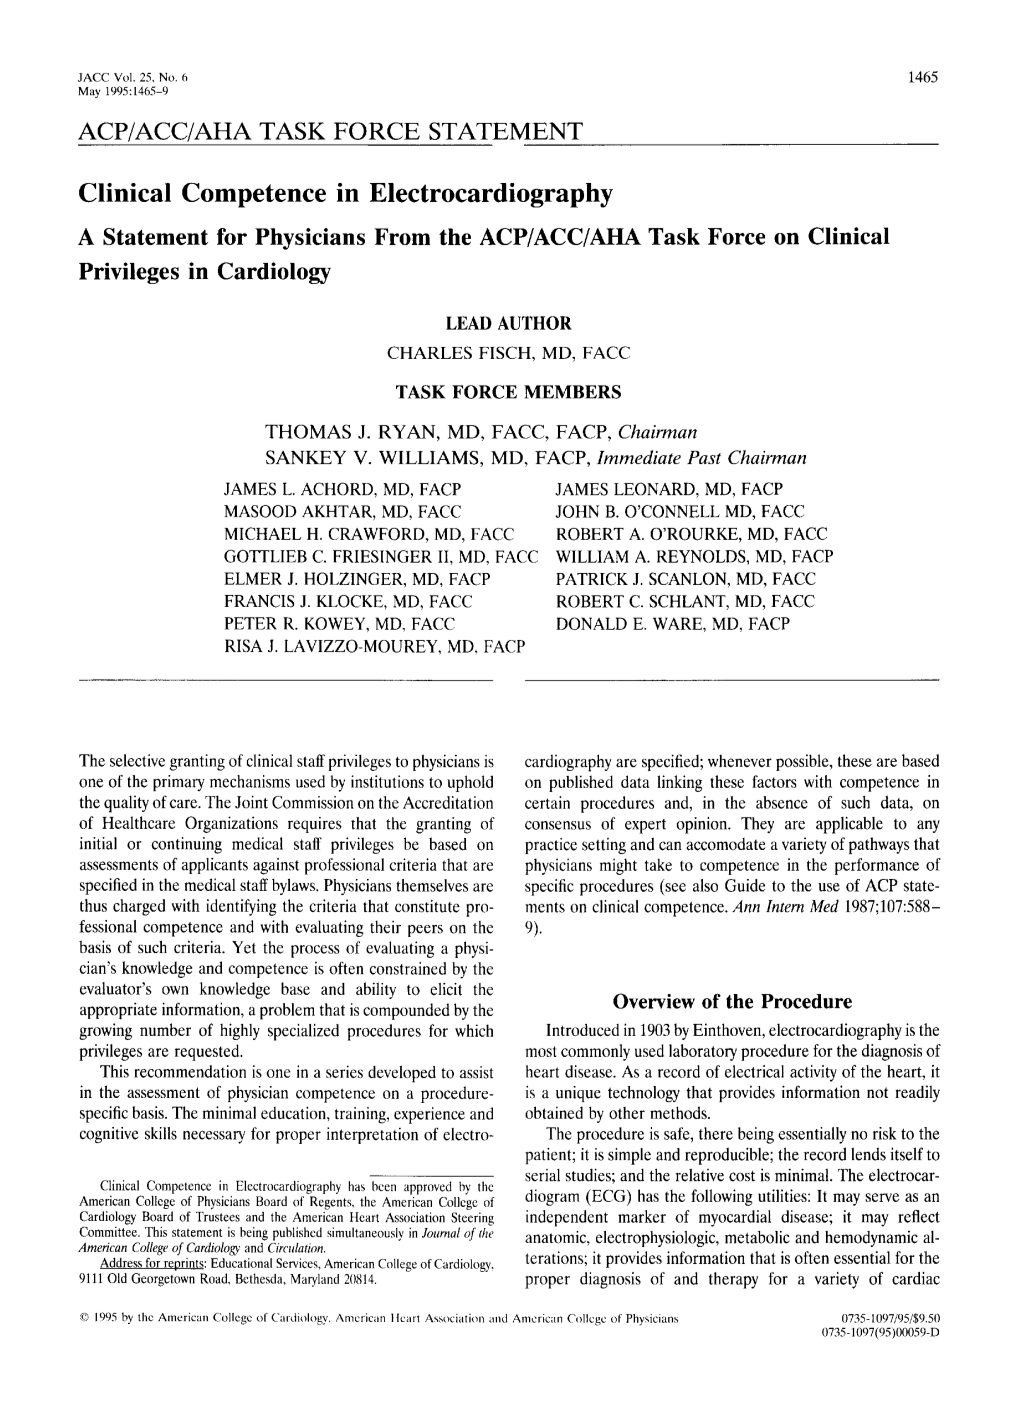 Clinical Competence in Electrocardiography a Statement for Physicians from the ACP/ACC/AHA Task Force on Clinical Privileges in Cardiology